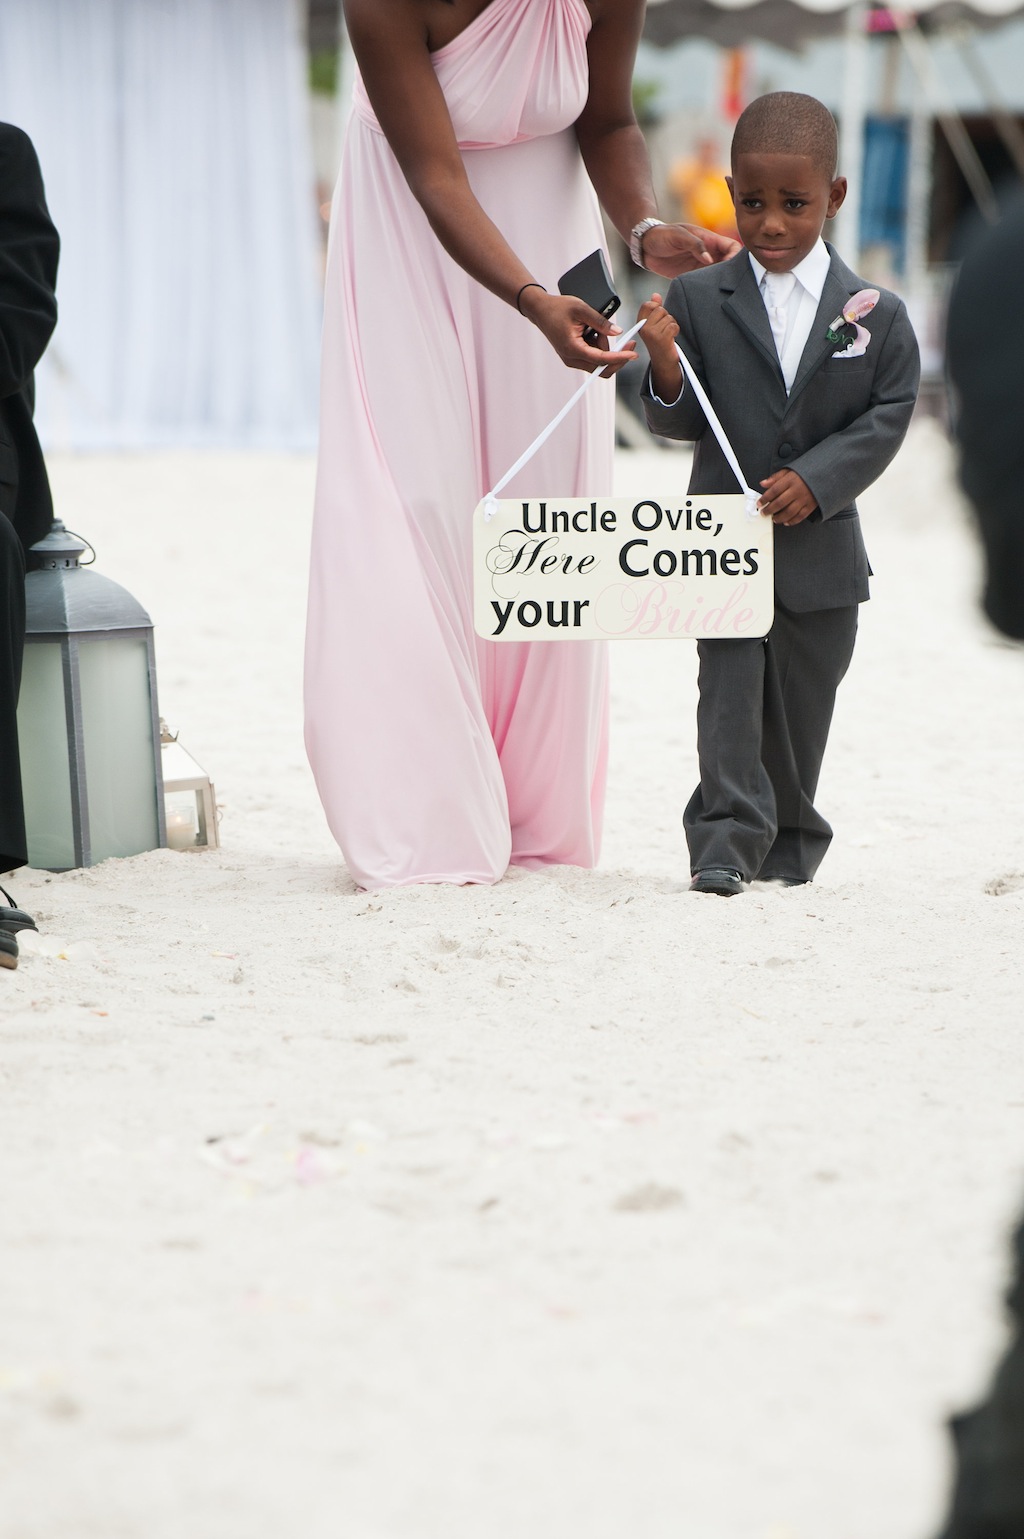 Post Card Inn Wedding St. Pete Beach - In True Colors Photography - Pink, Ivory and White Beachfront Nigerian Wedding (20)